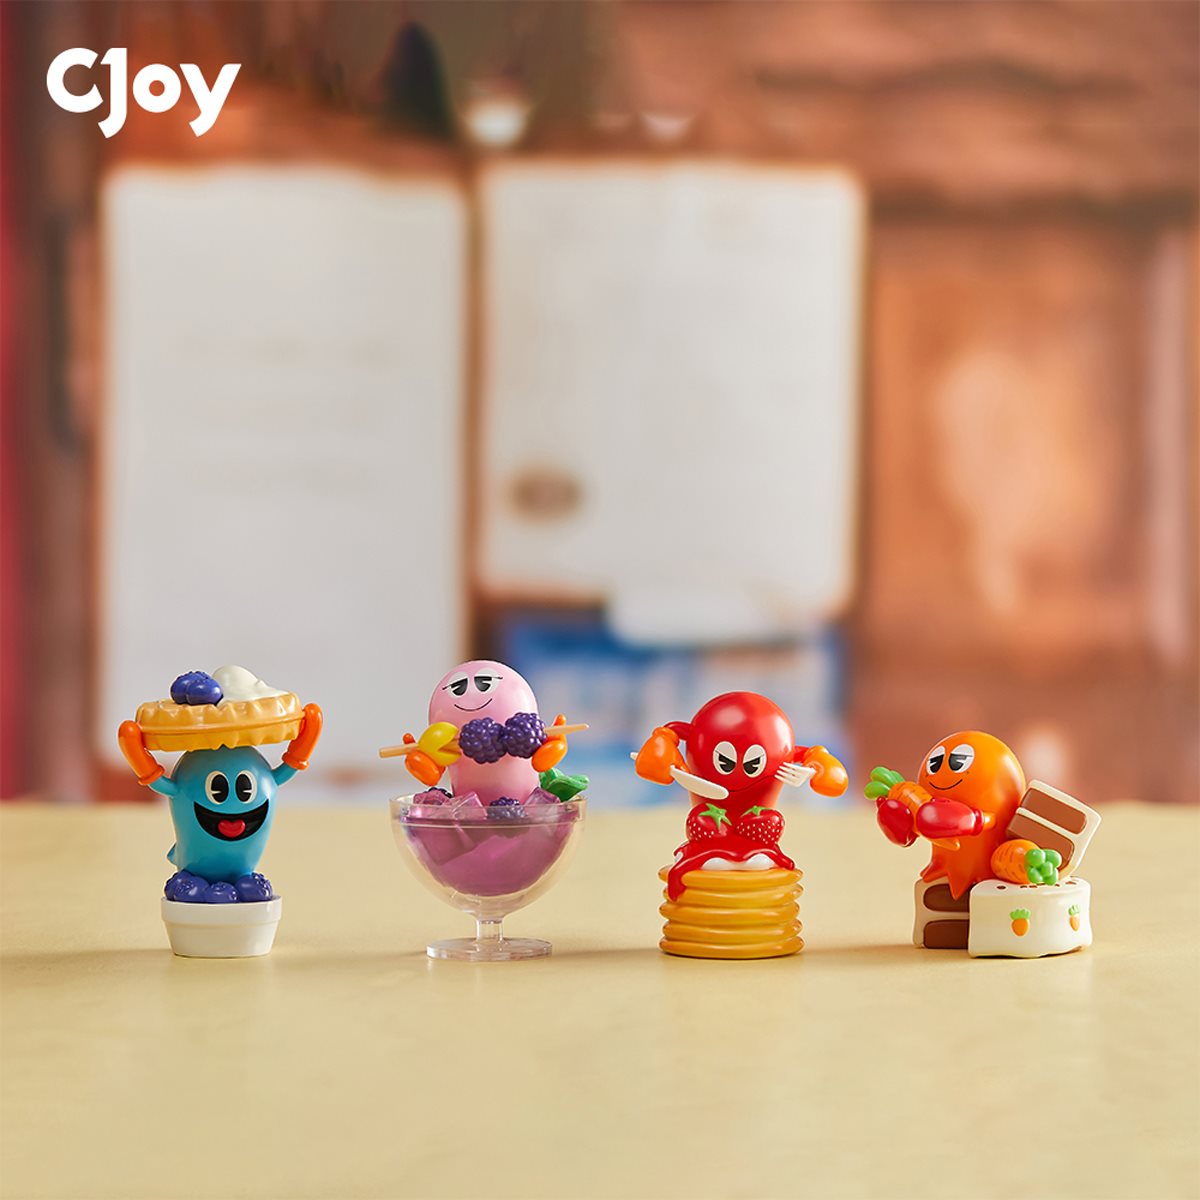 Pac-man Goes to Brunch Blind Box Series by CJOY x Bandai